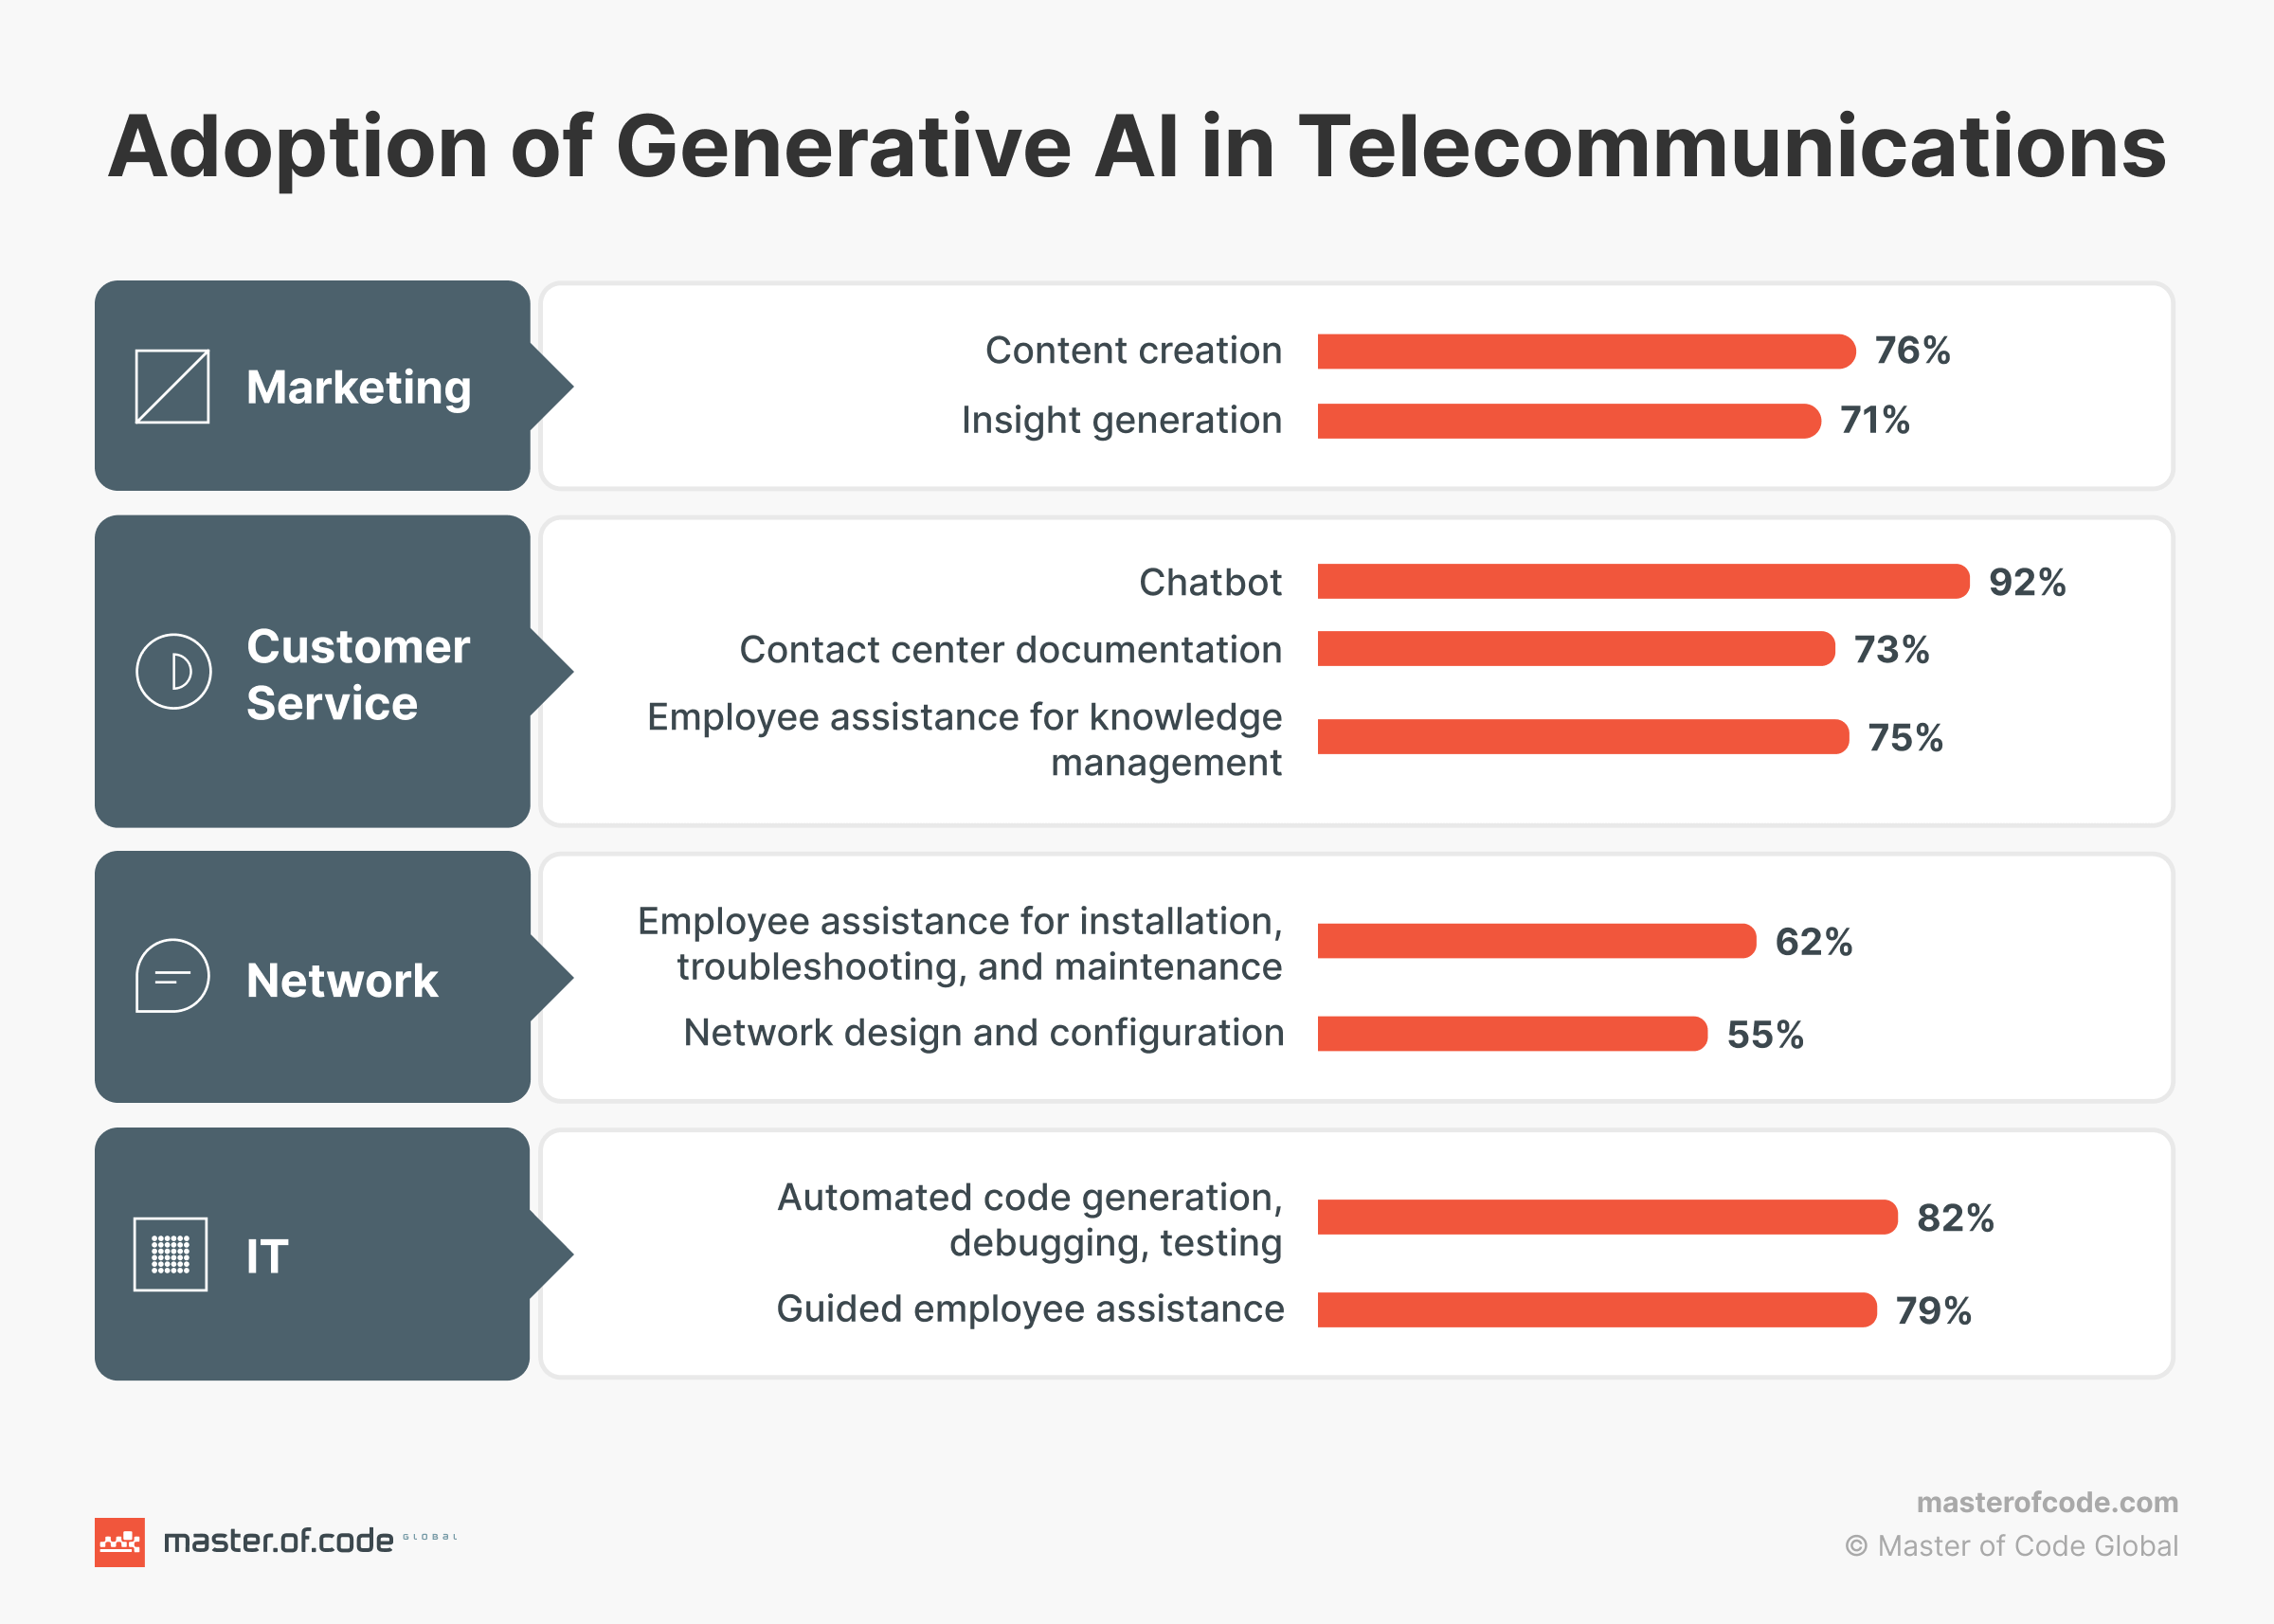 Adoption of Gen AI in Telecommunications